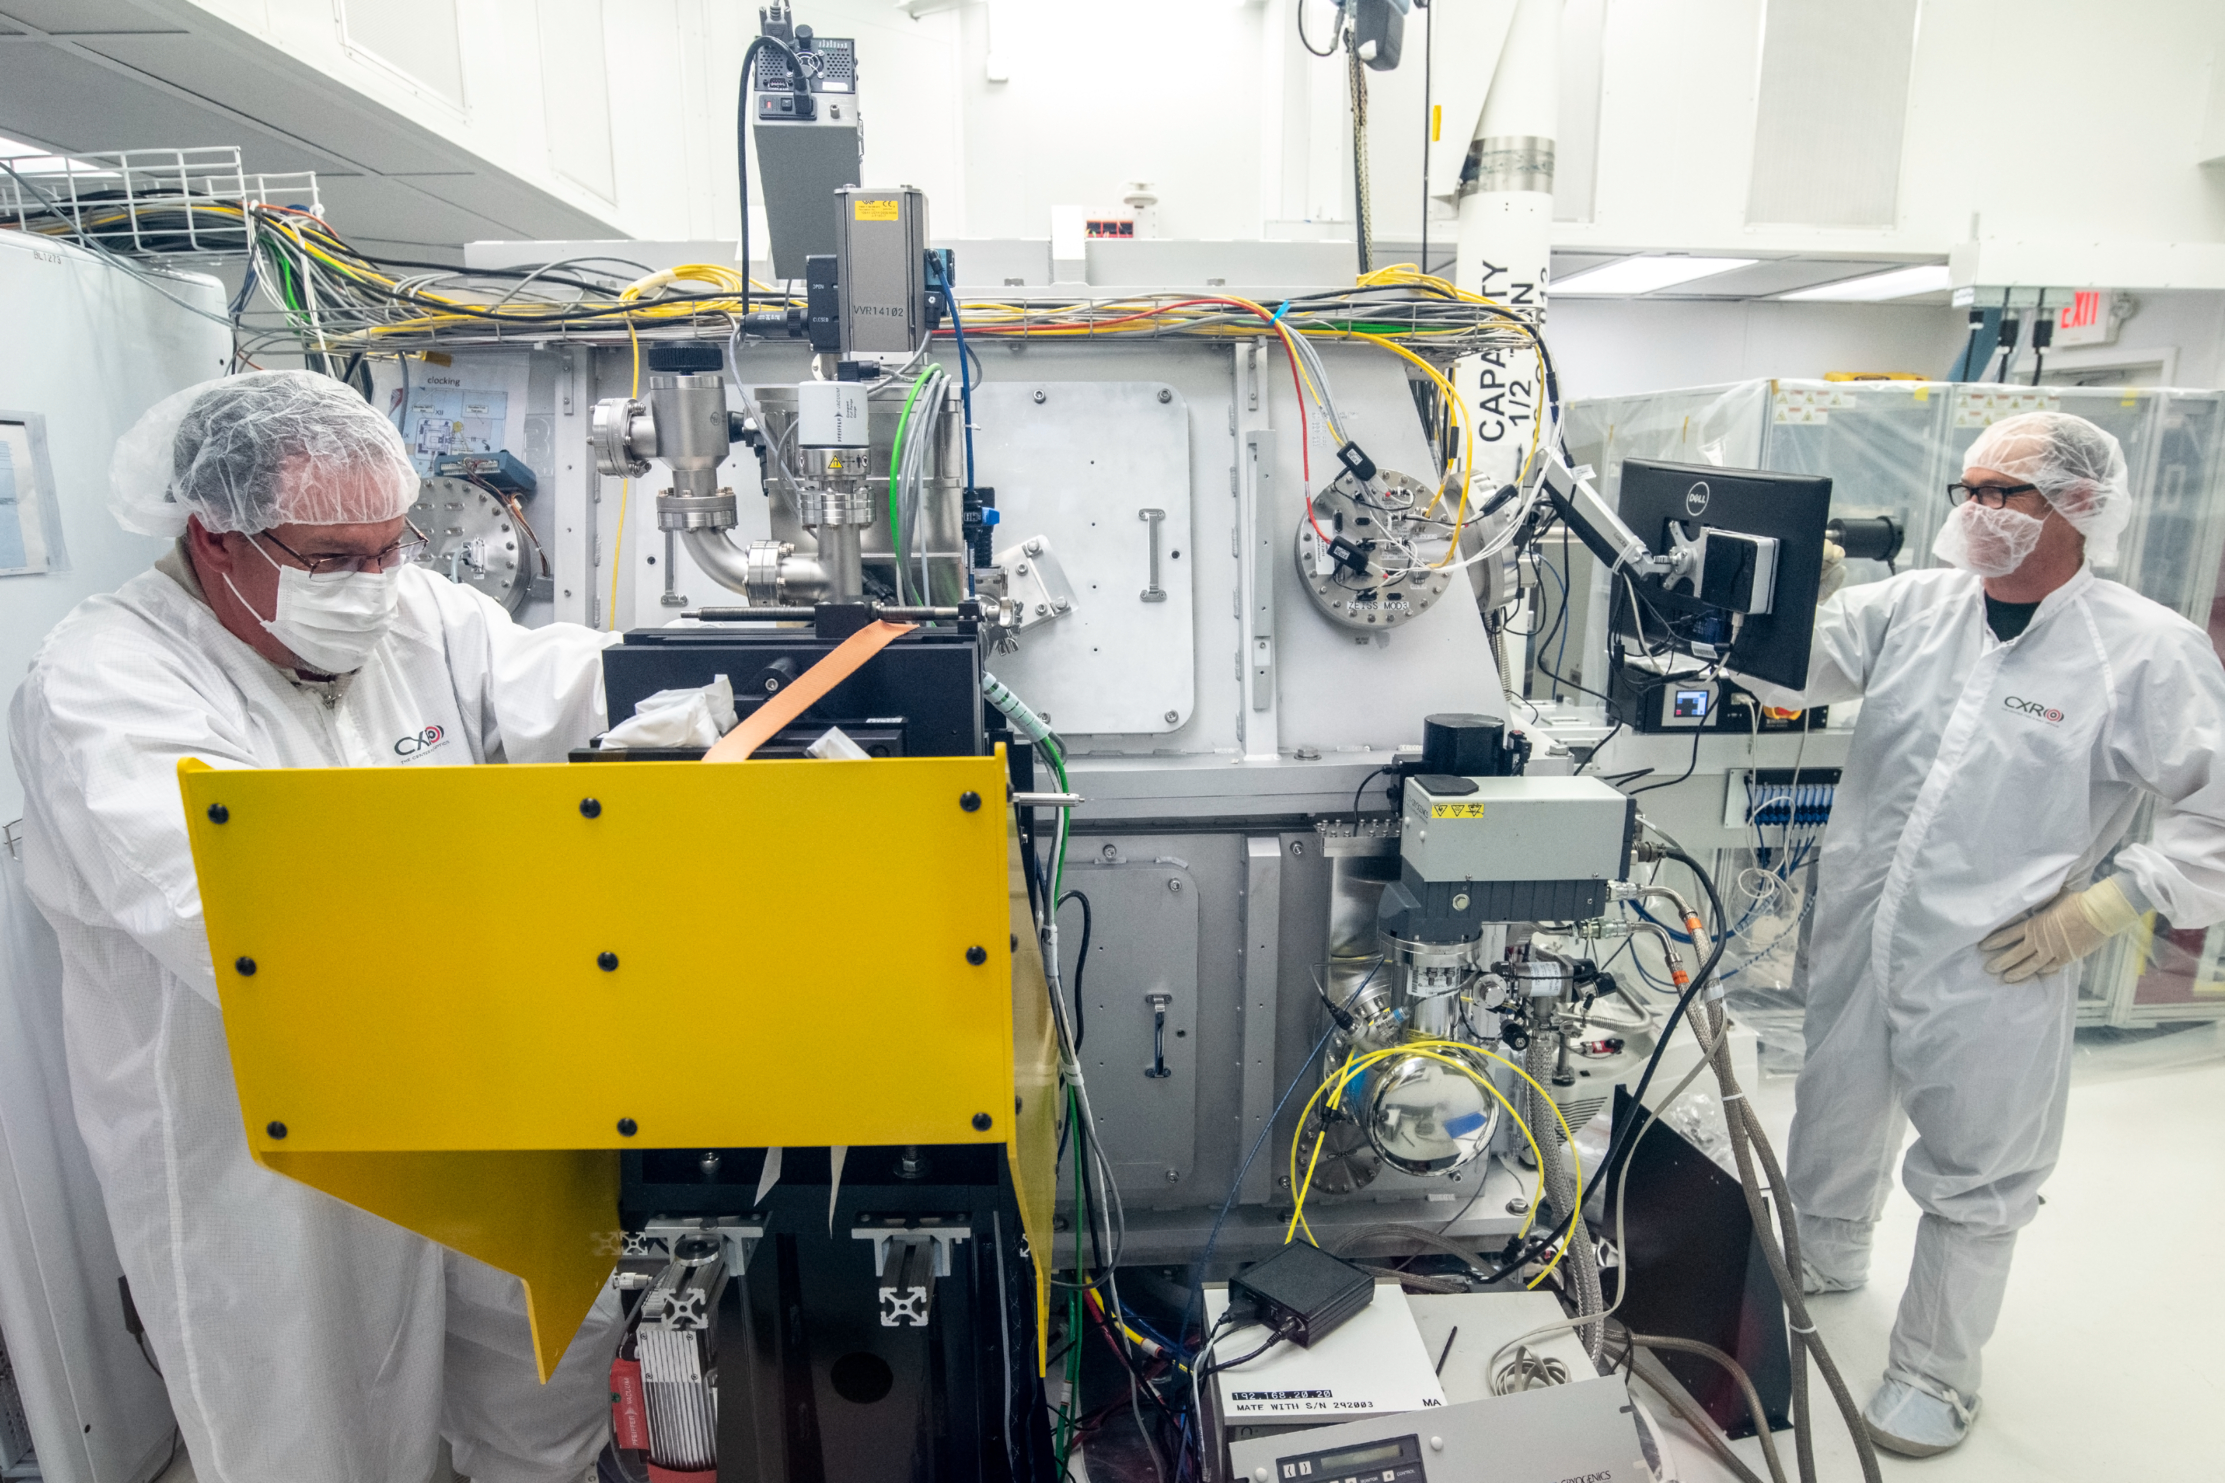 Scientists in protective equipment monitor X-ray Optics Beamline 10.0.1.4 at the ALS